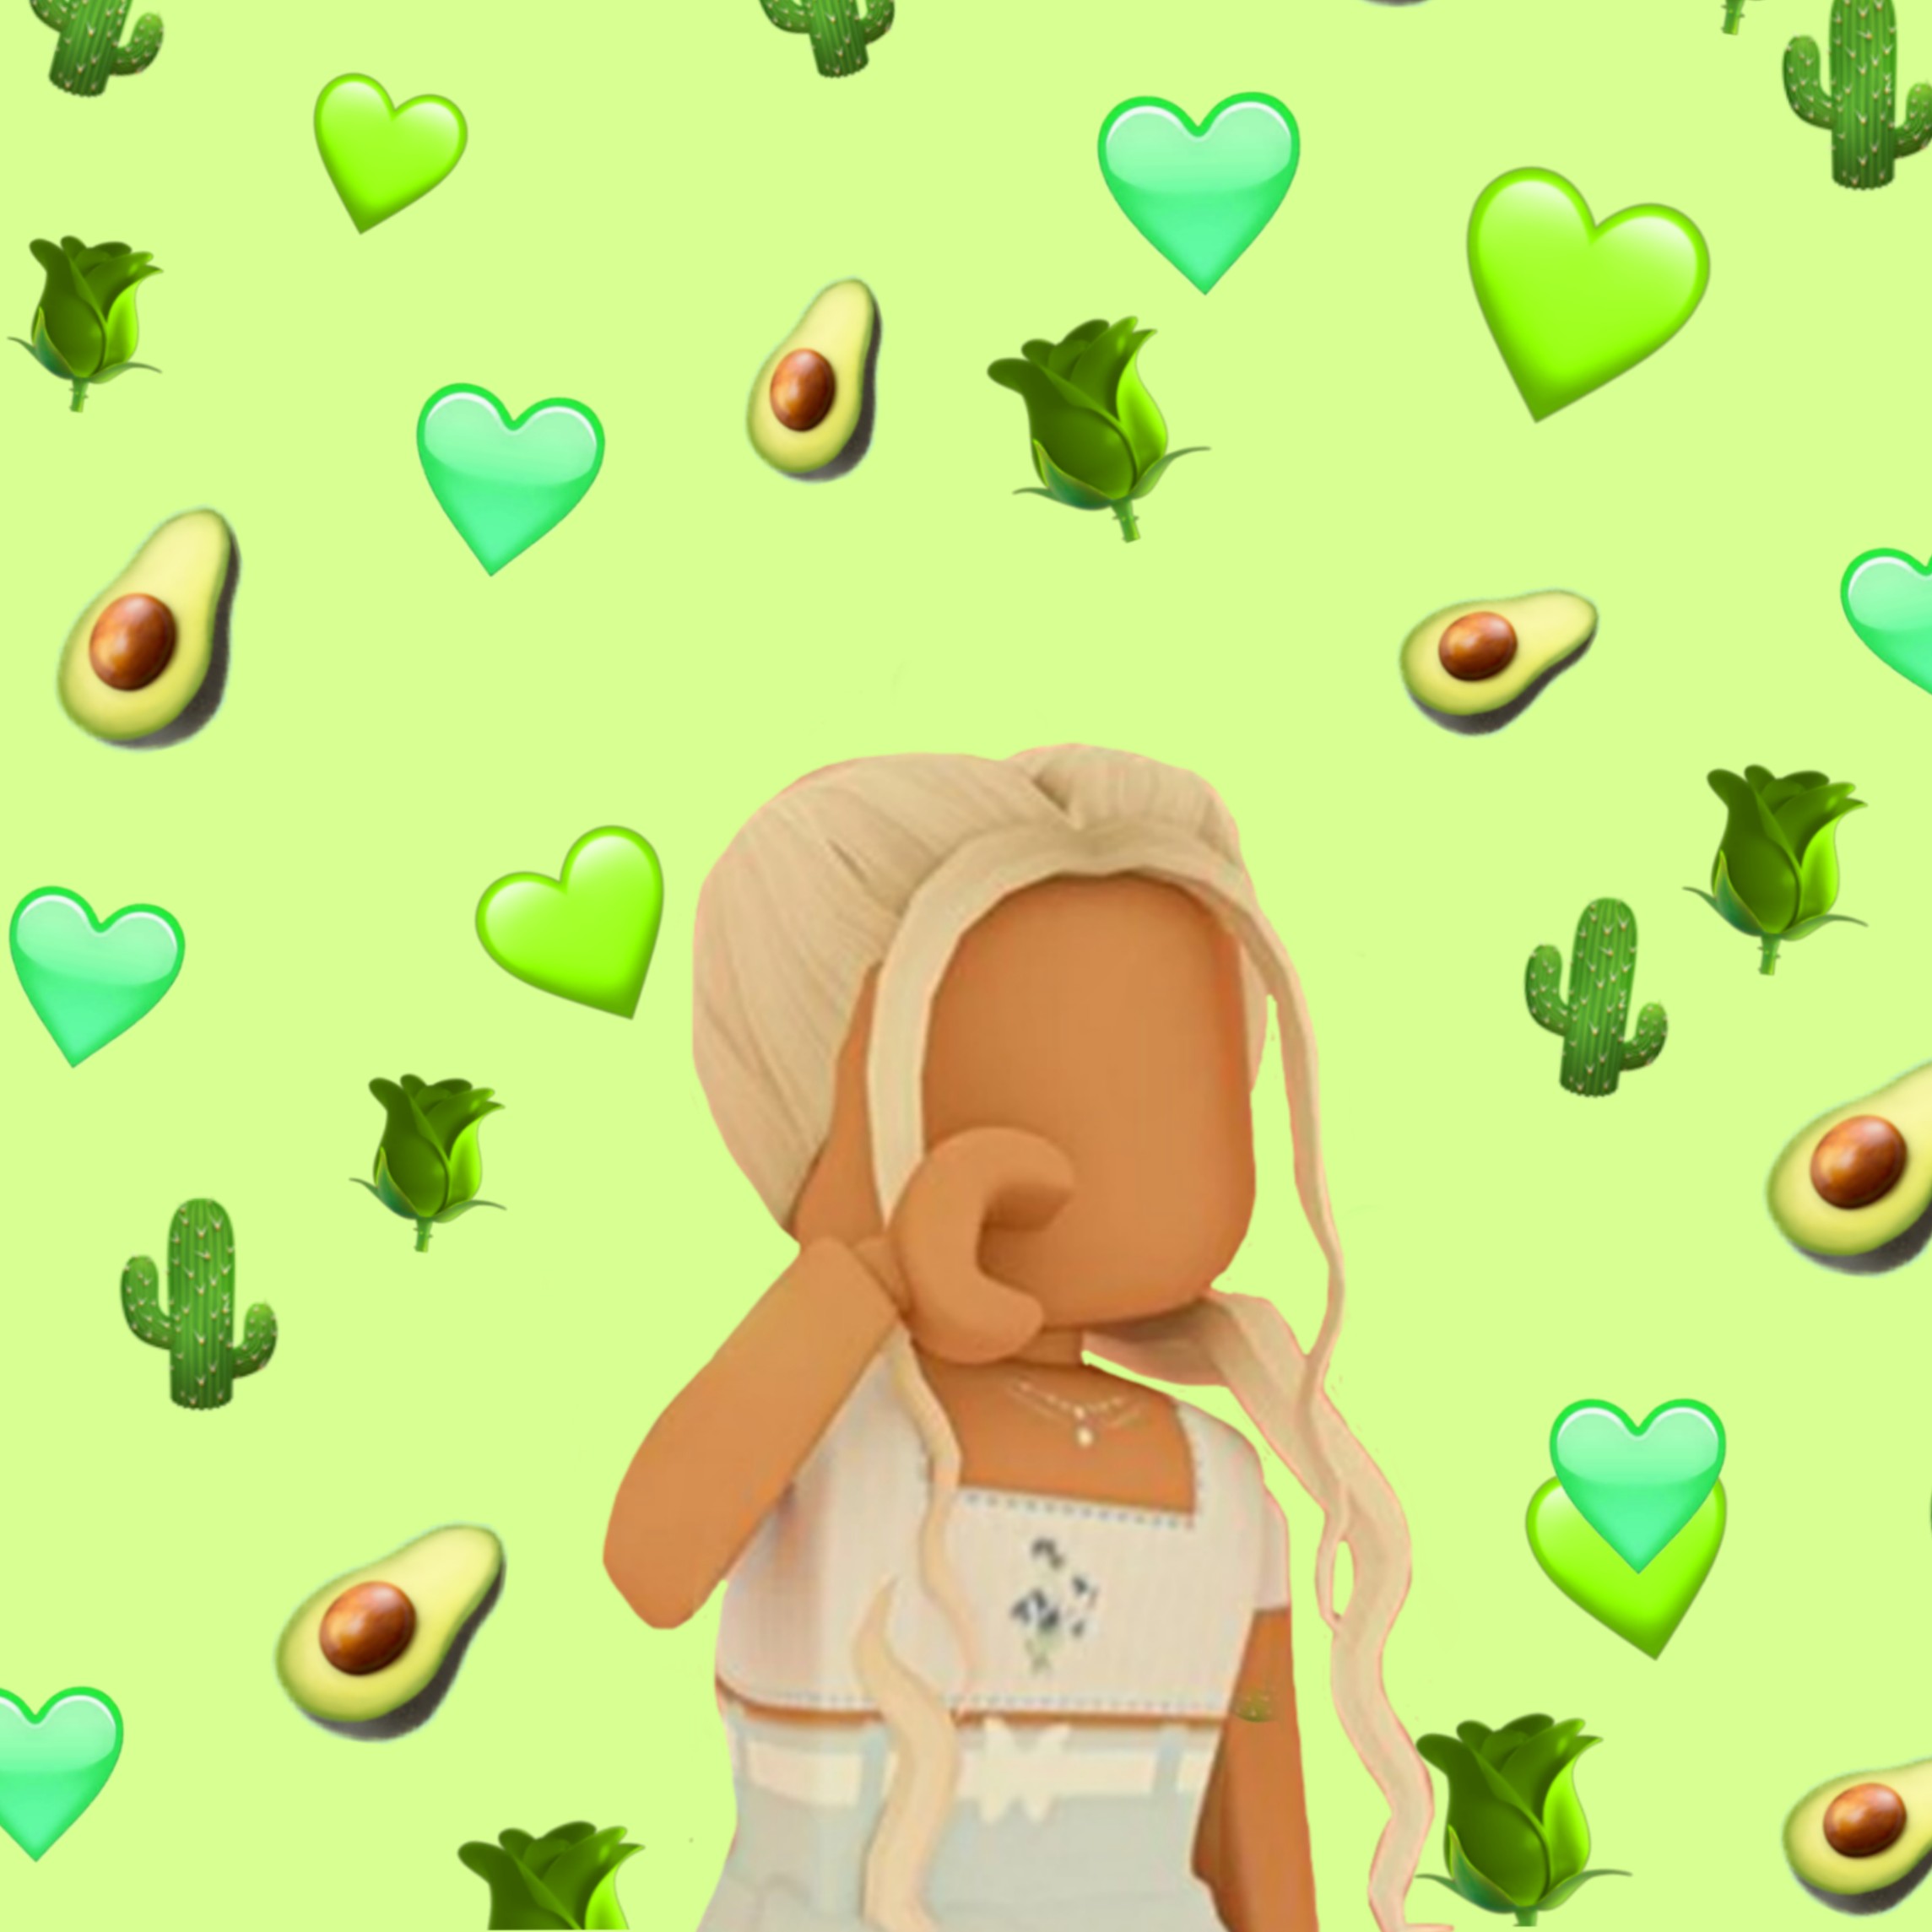 Robloxavocadogirl Image By Ecrin Official - robloxavatargirl sweet image by ecrin official